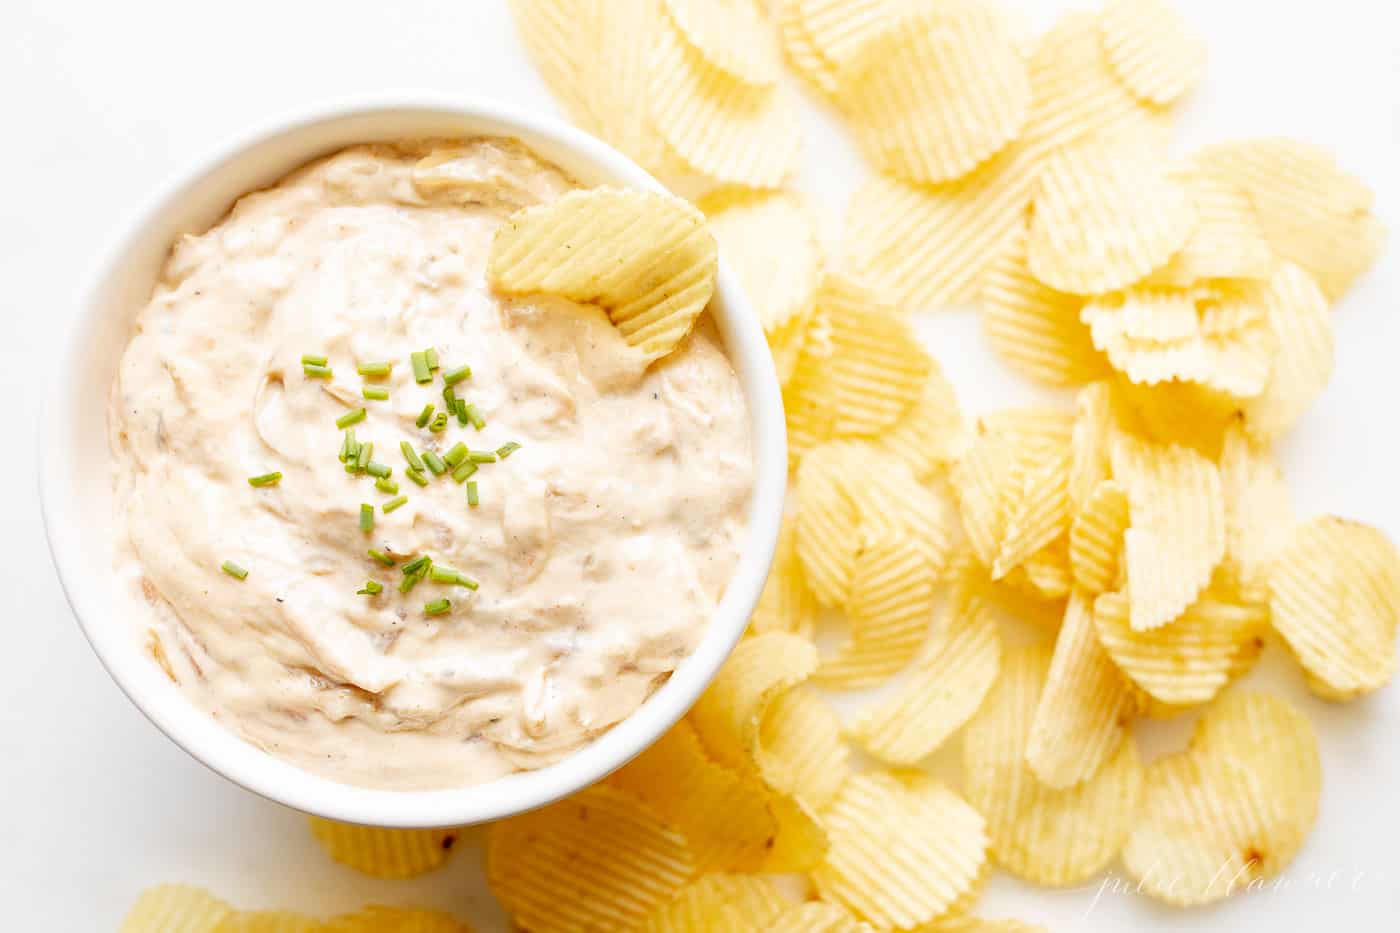 dip bowl surrounded by chips